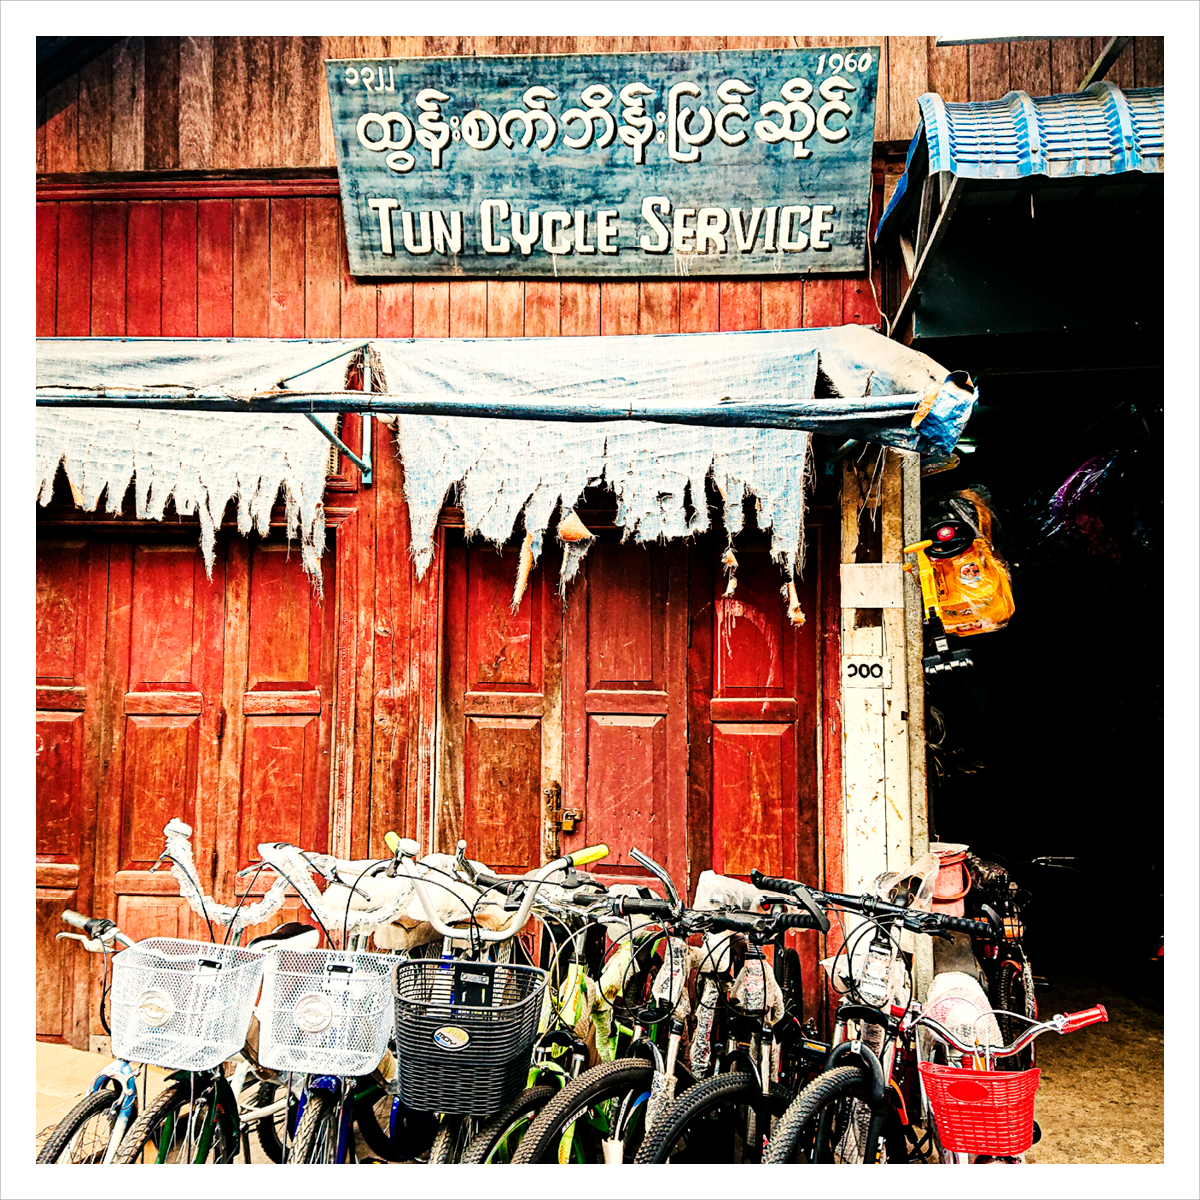 photography of streetlife, daily happenings and architecture in thailand and burma